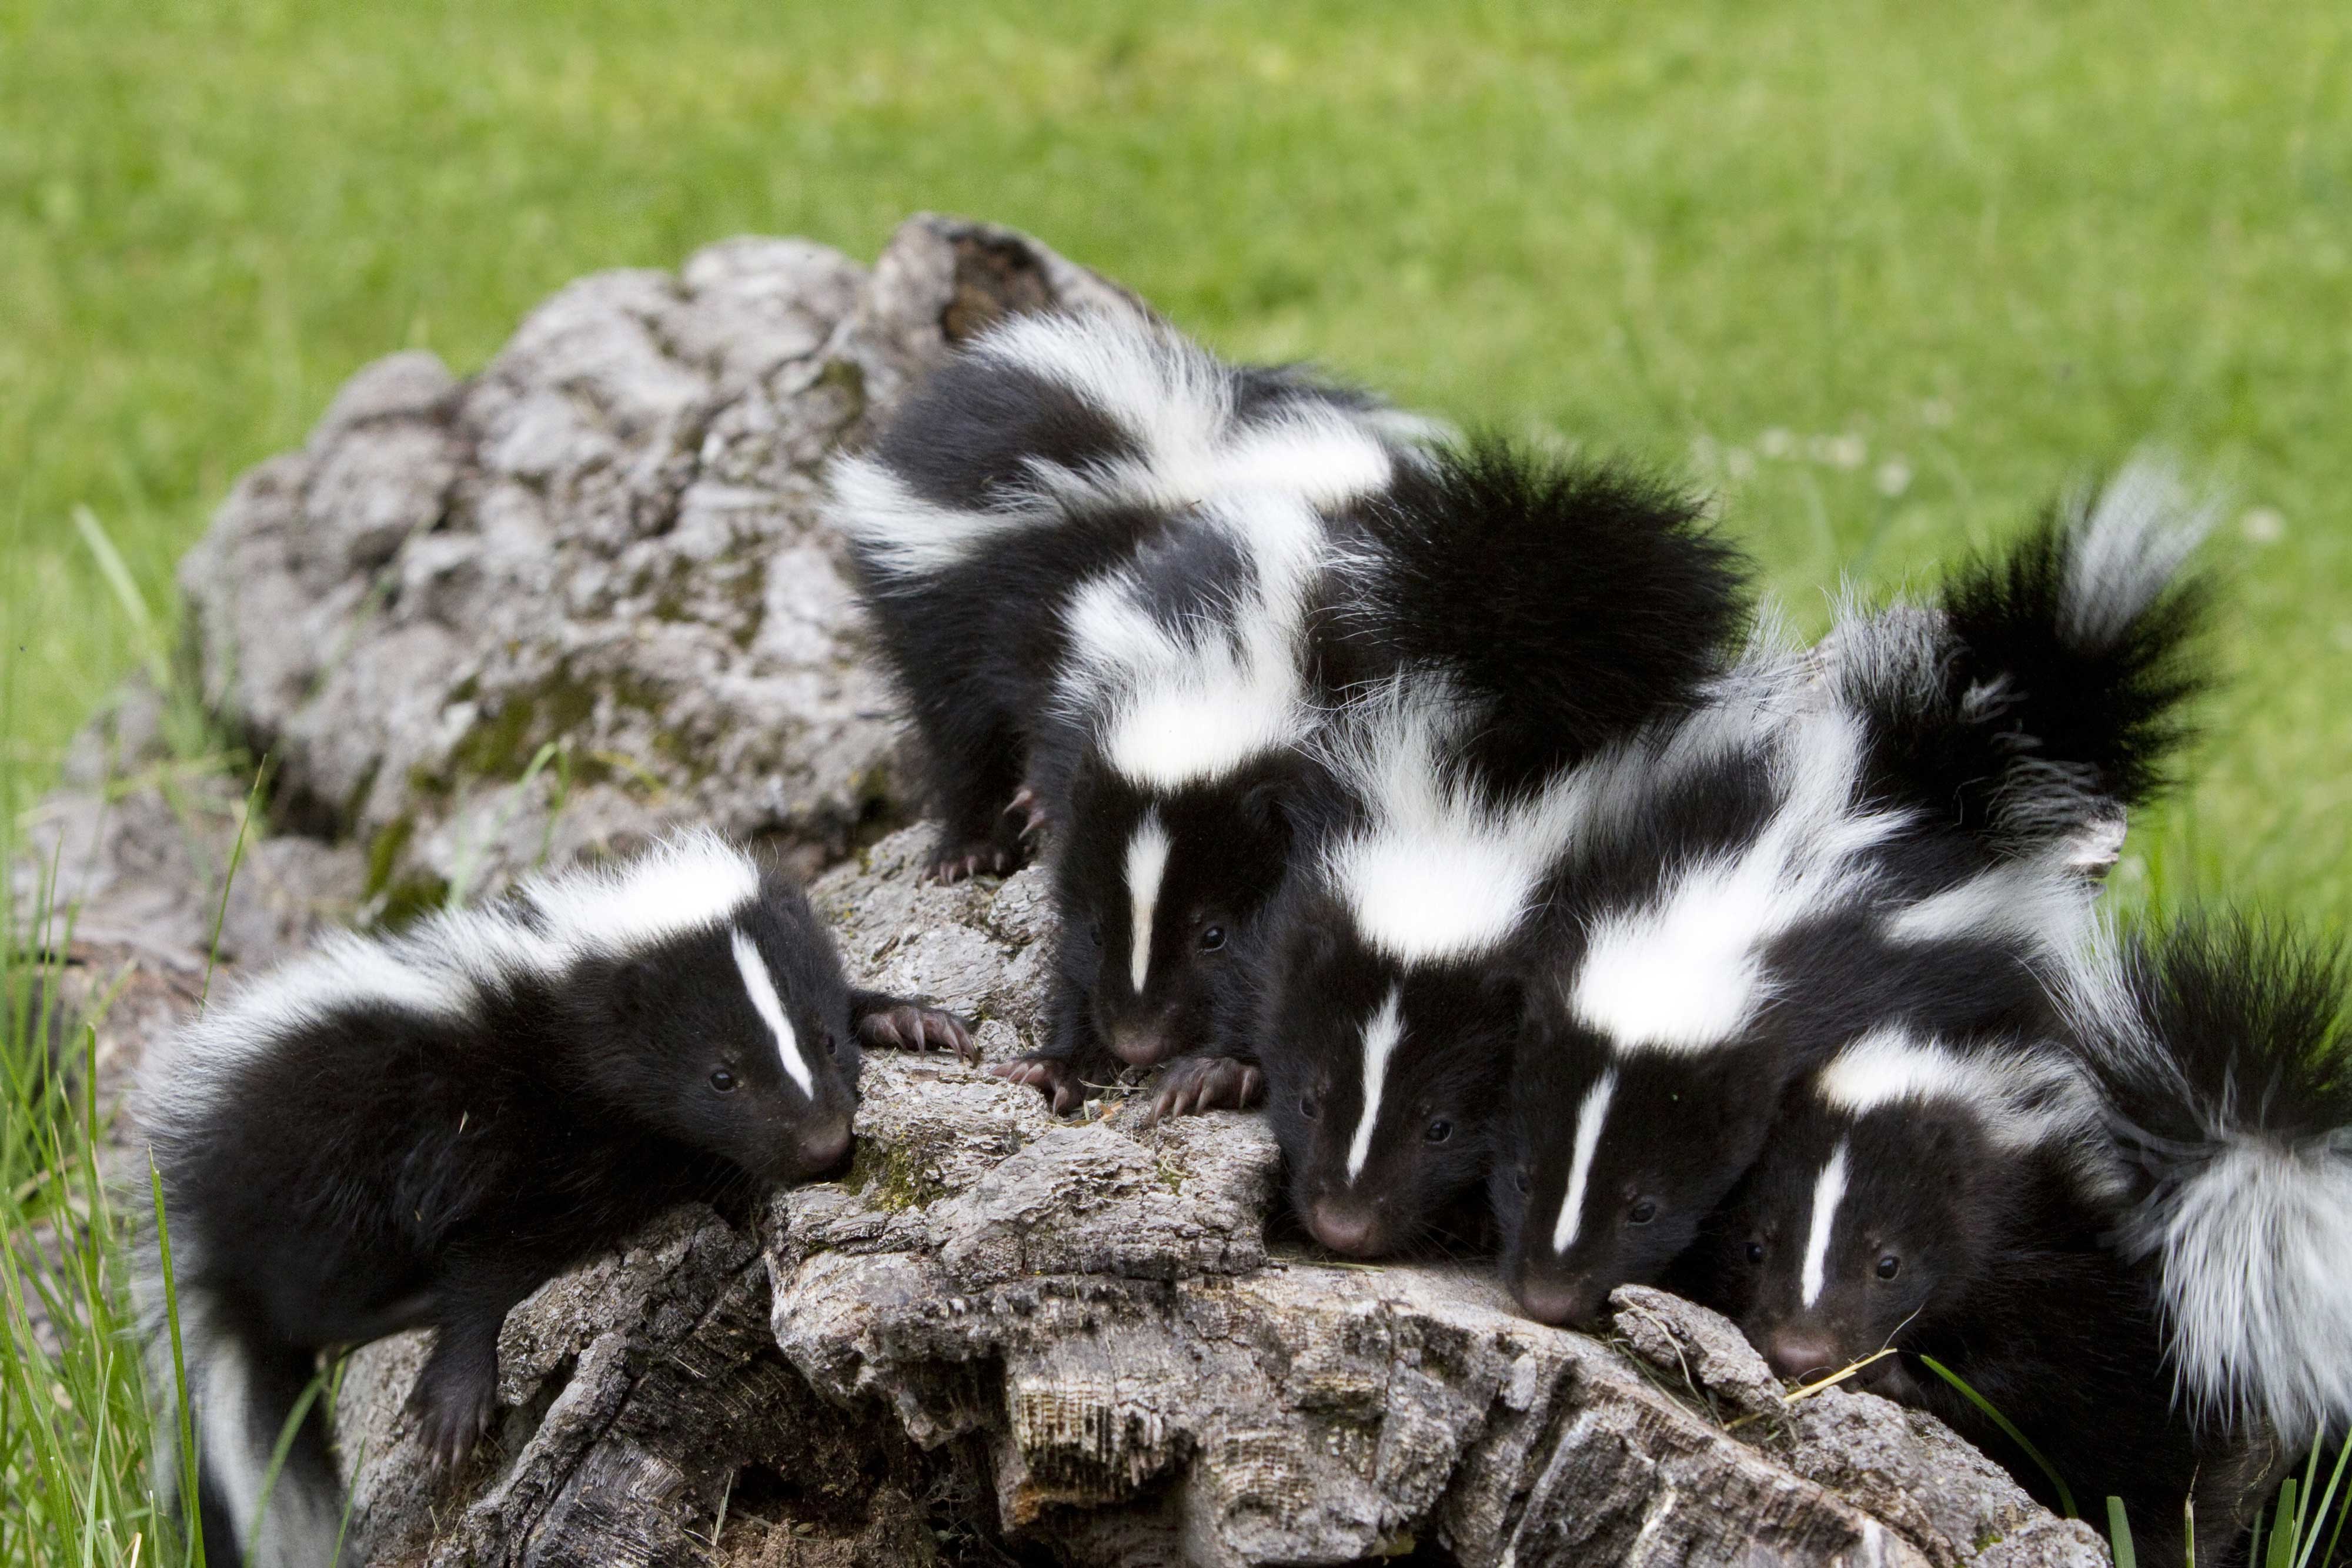 A group of skunks sitting on a log.